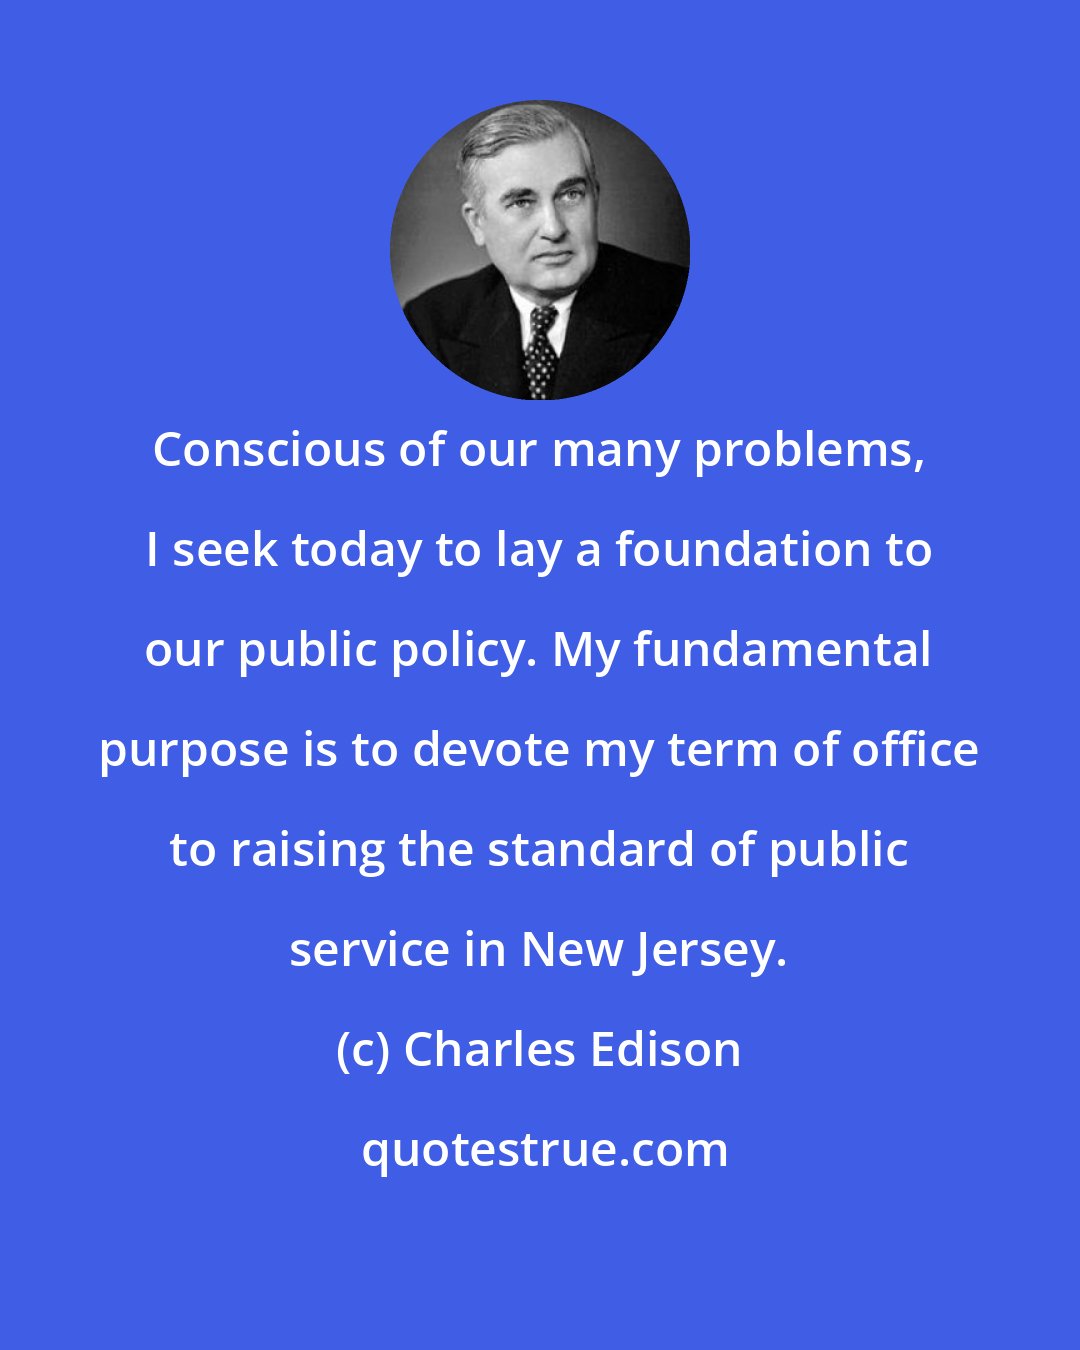 Charles Edison: Conscious of our many problems, I seek today to lay a foundation to our public policy. My fundamental purpose is to devote my term of office to raising the standard of public service in New Jersey.